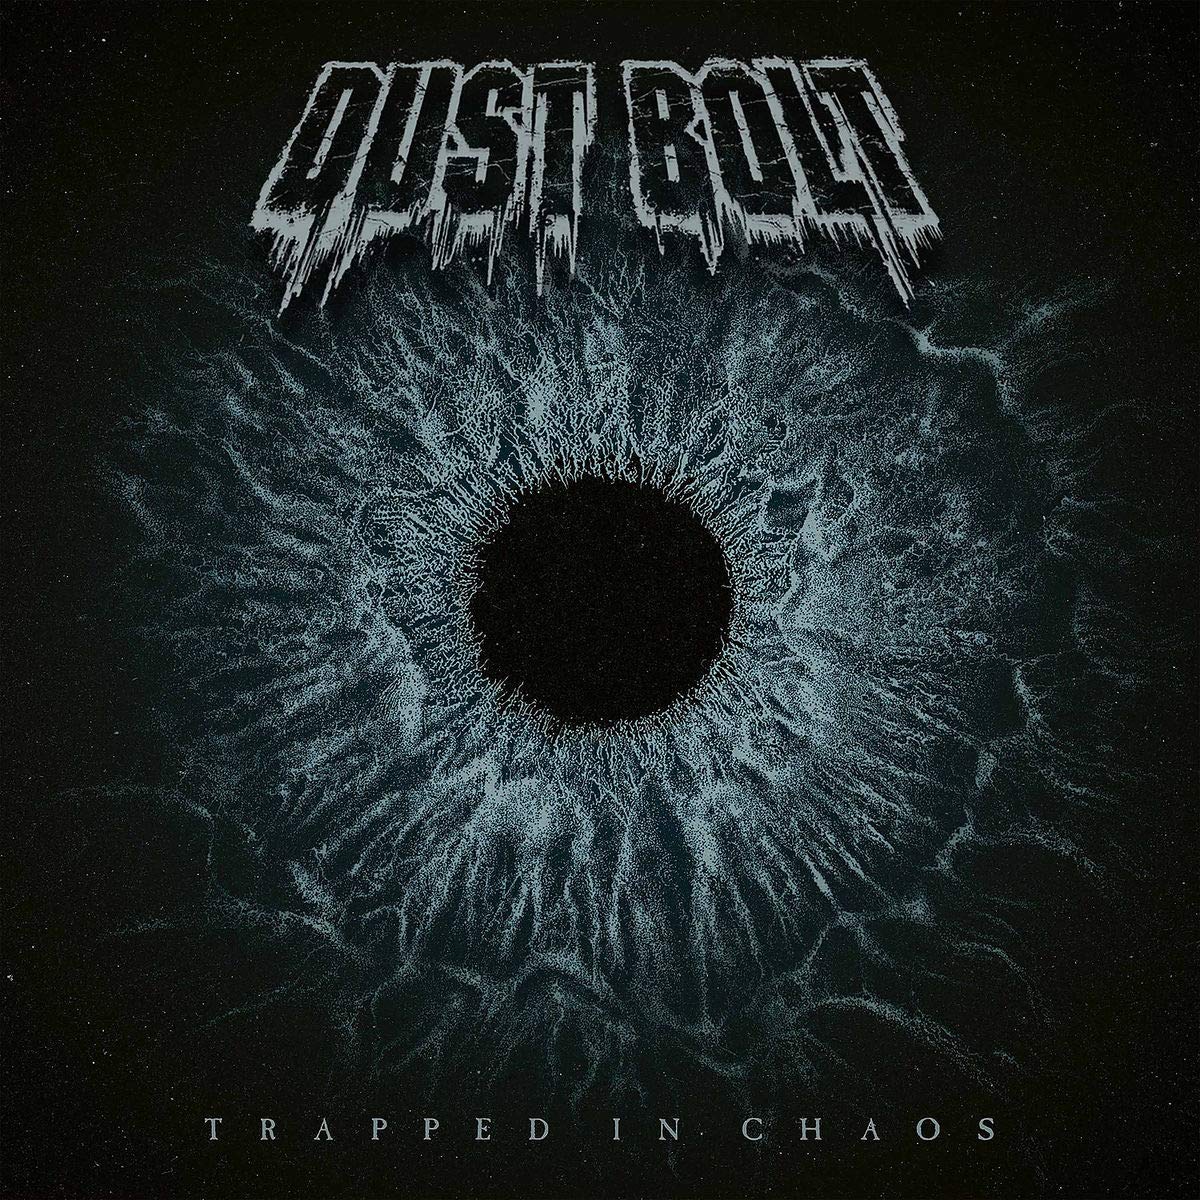 Dust Bolt - Trapped In Chaos vinyl cover